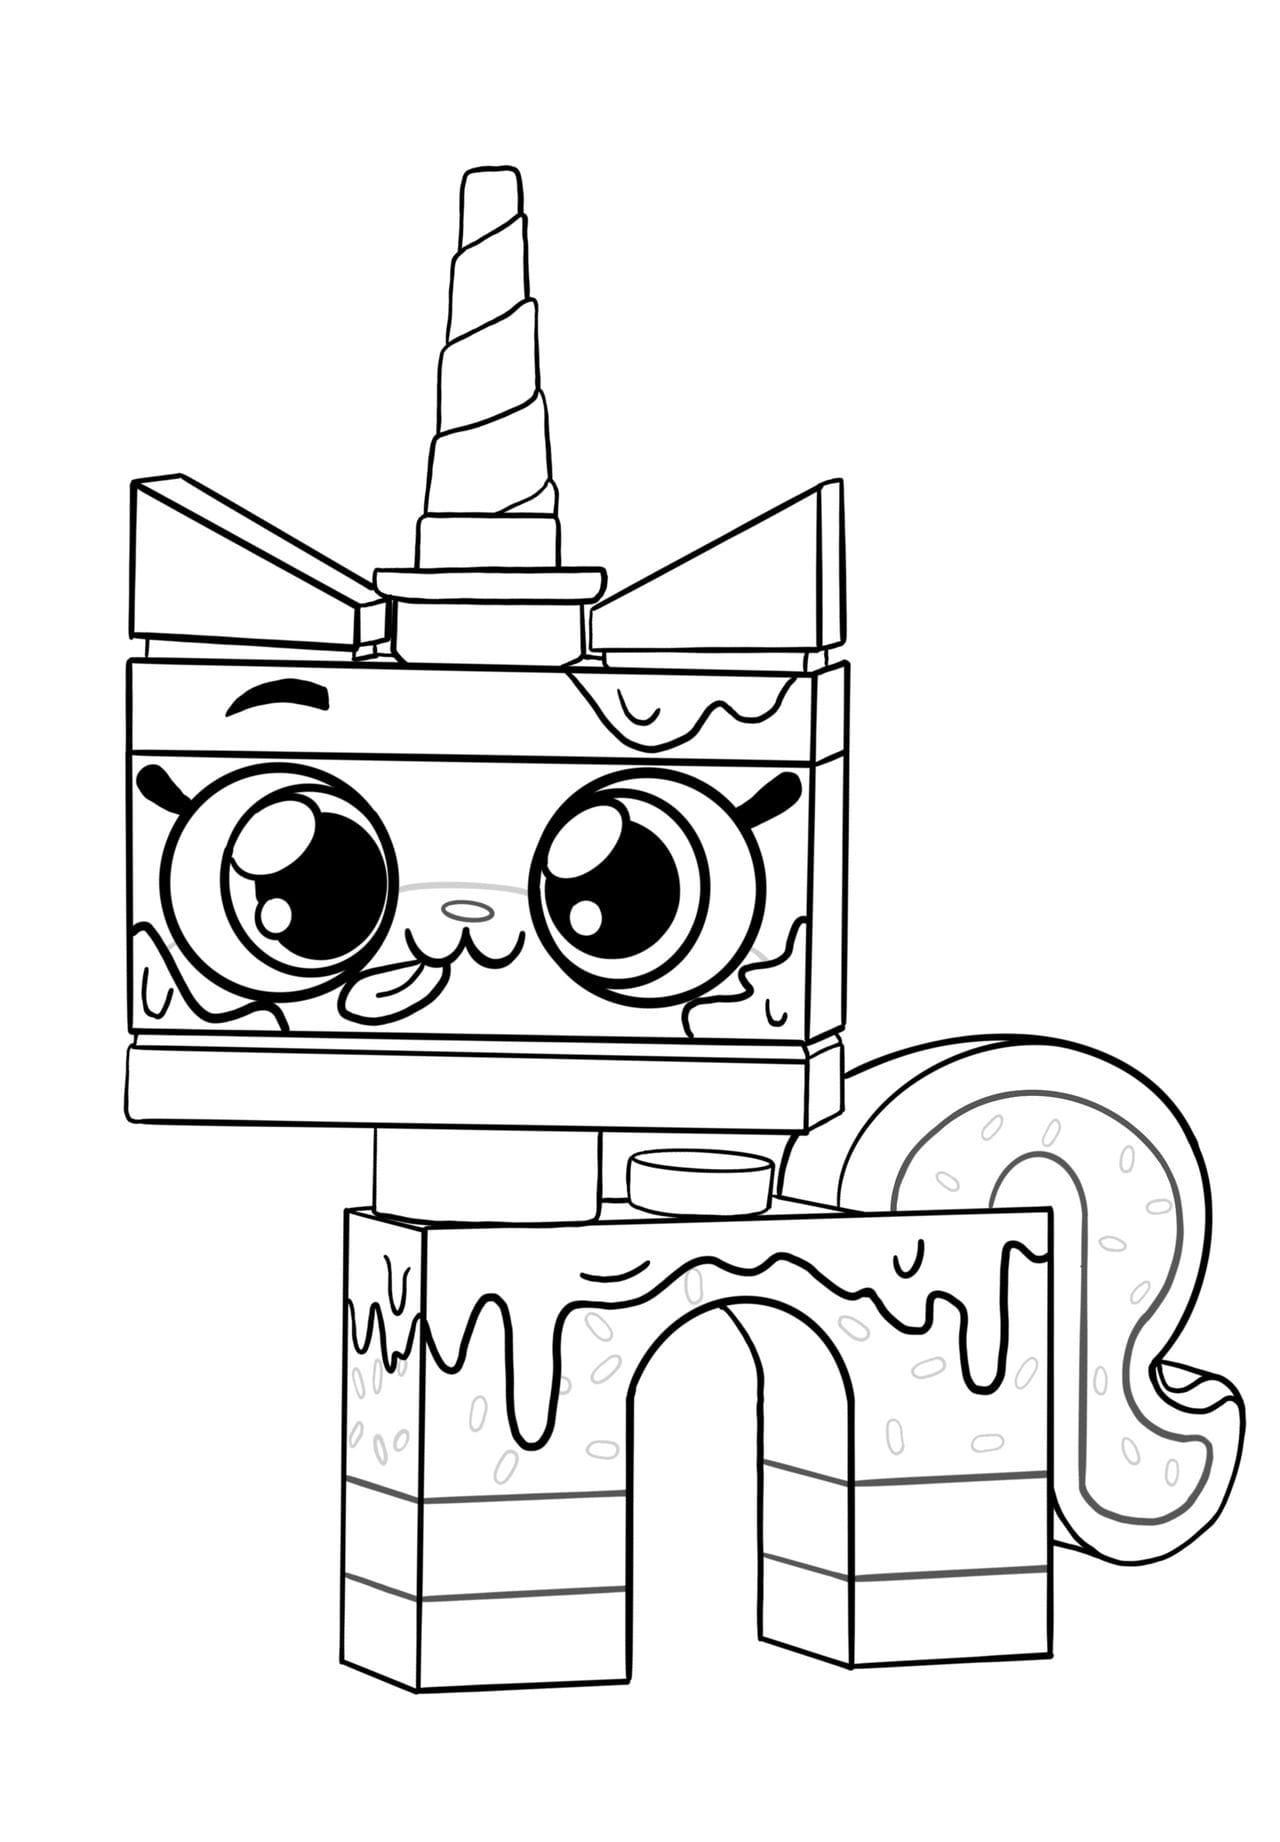 Unicorn Cat Coloring Pages   Free Coloring Pages